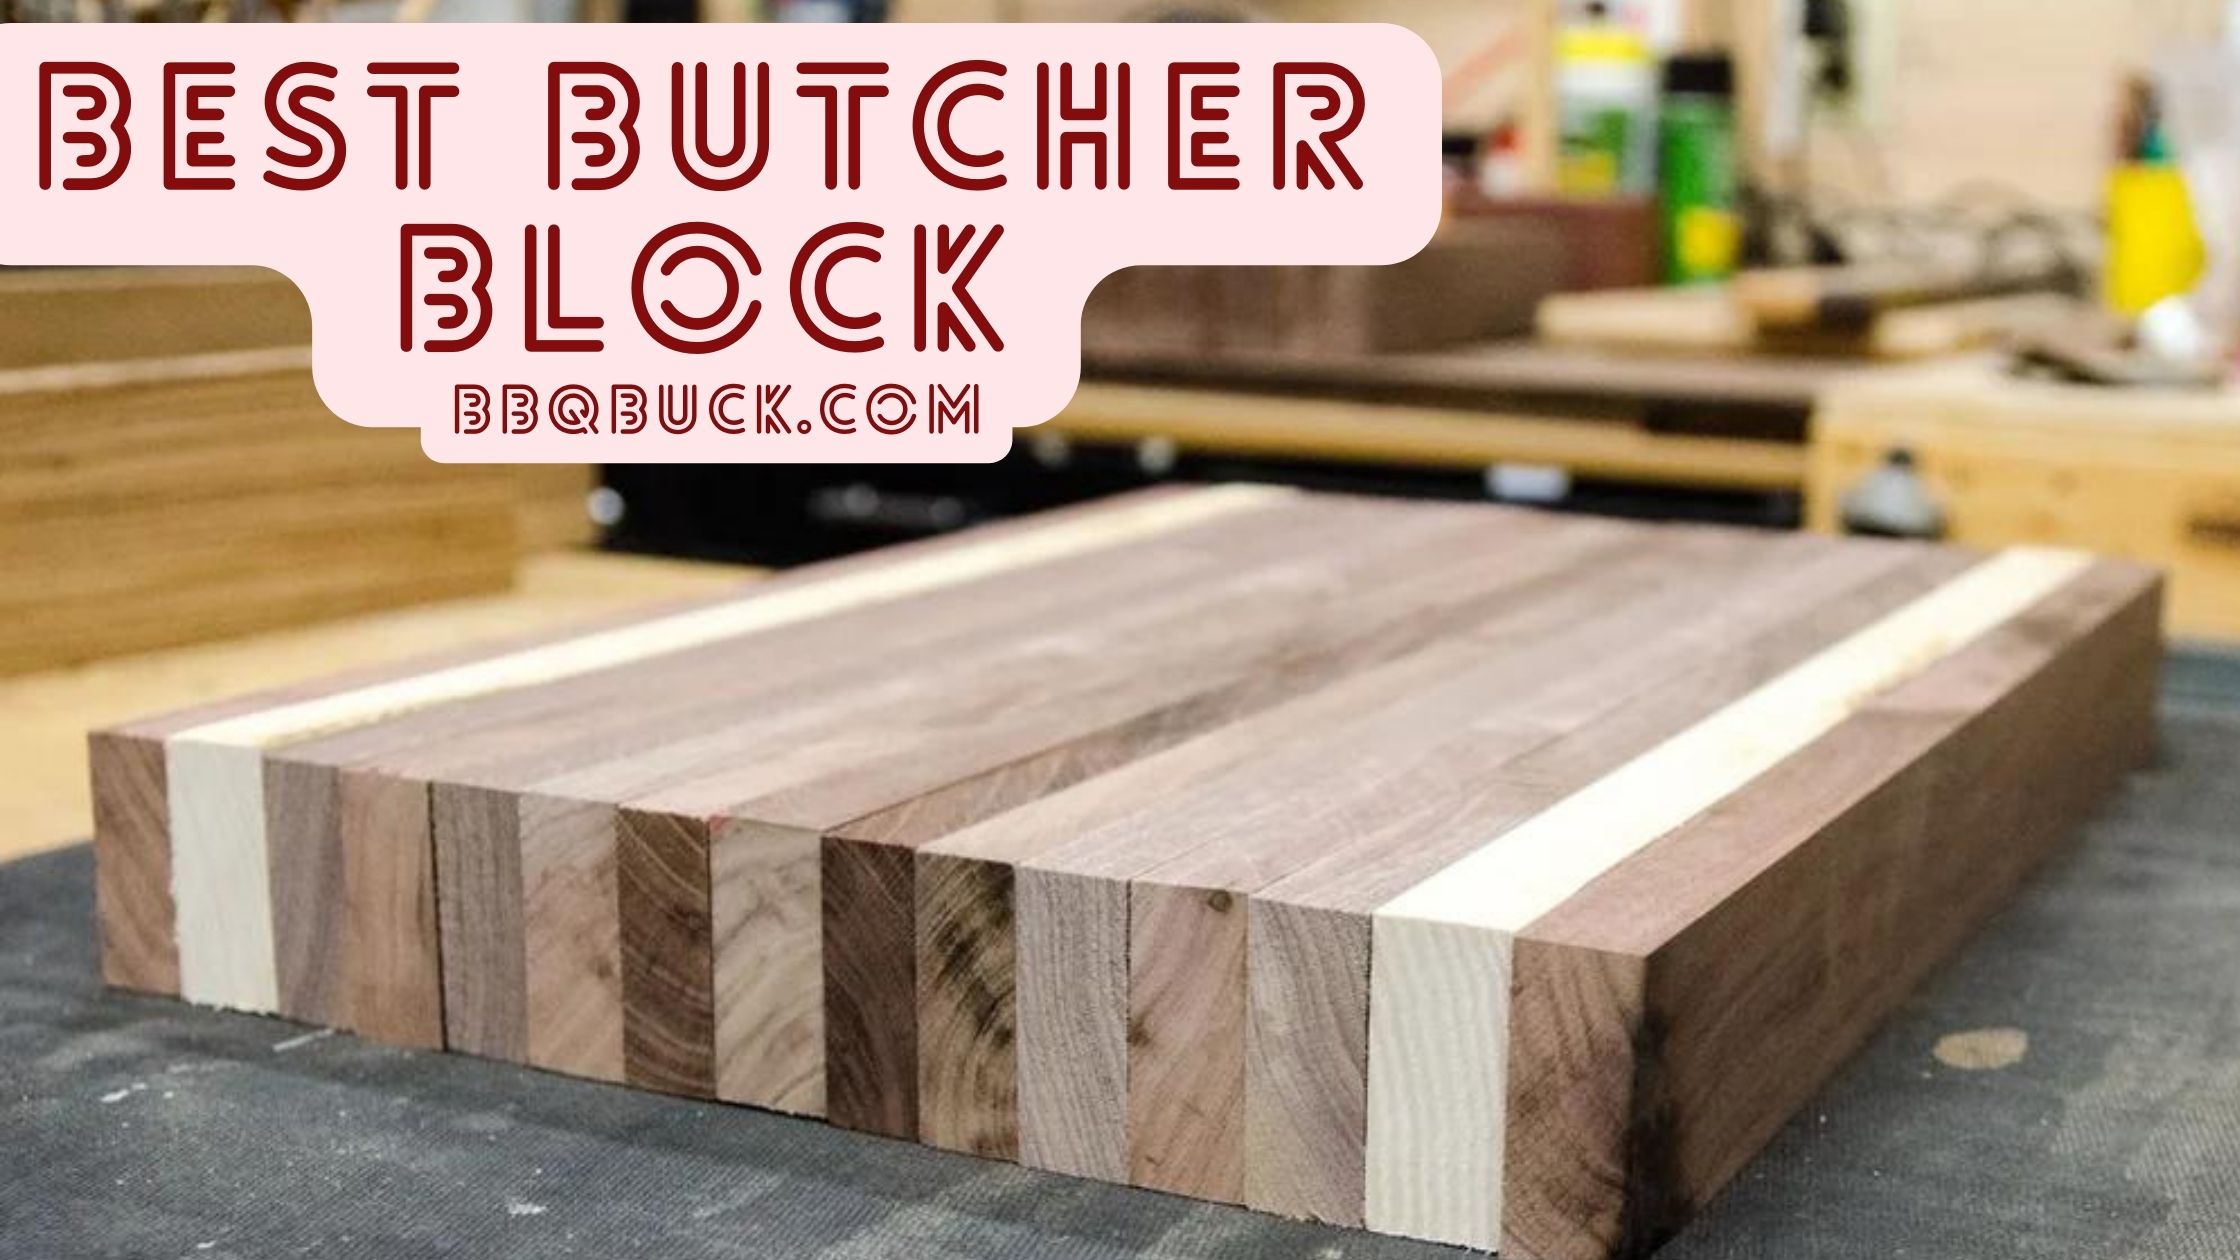 Best Butchers Block & Wood Cutting Boards for BBQ